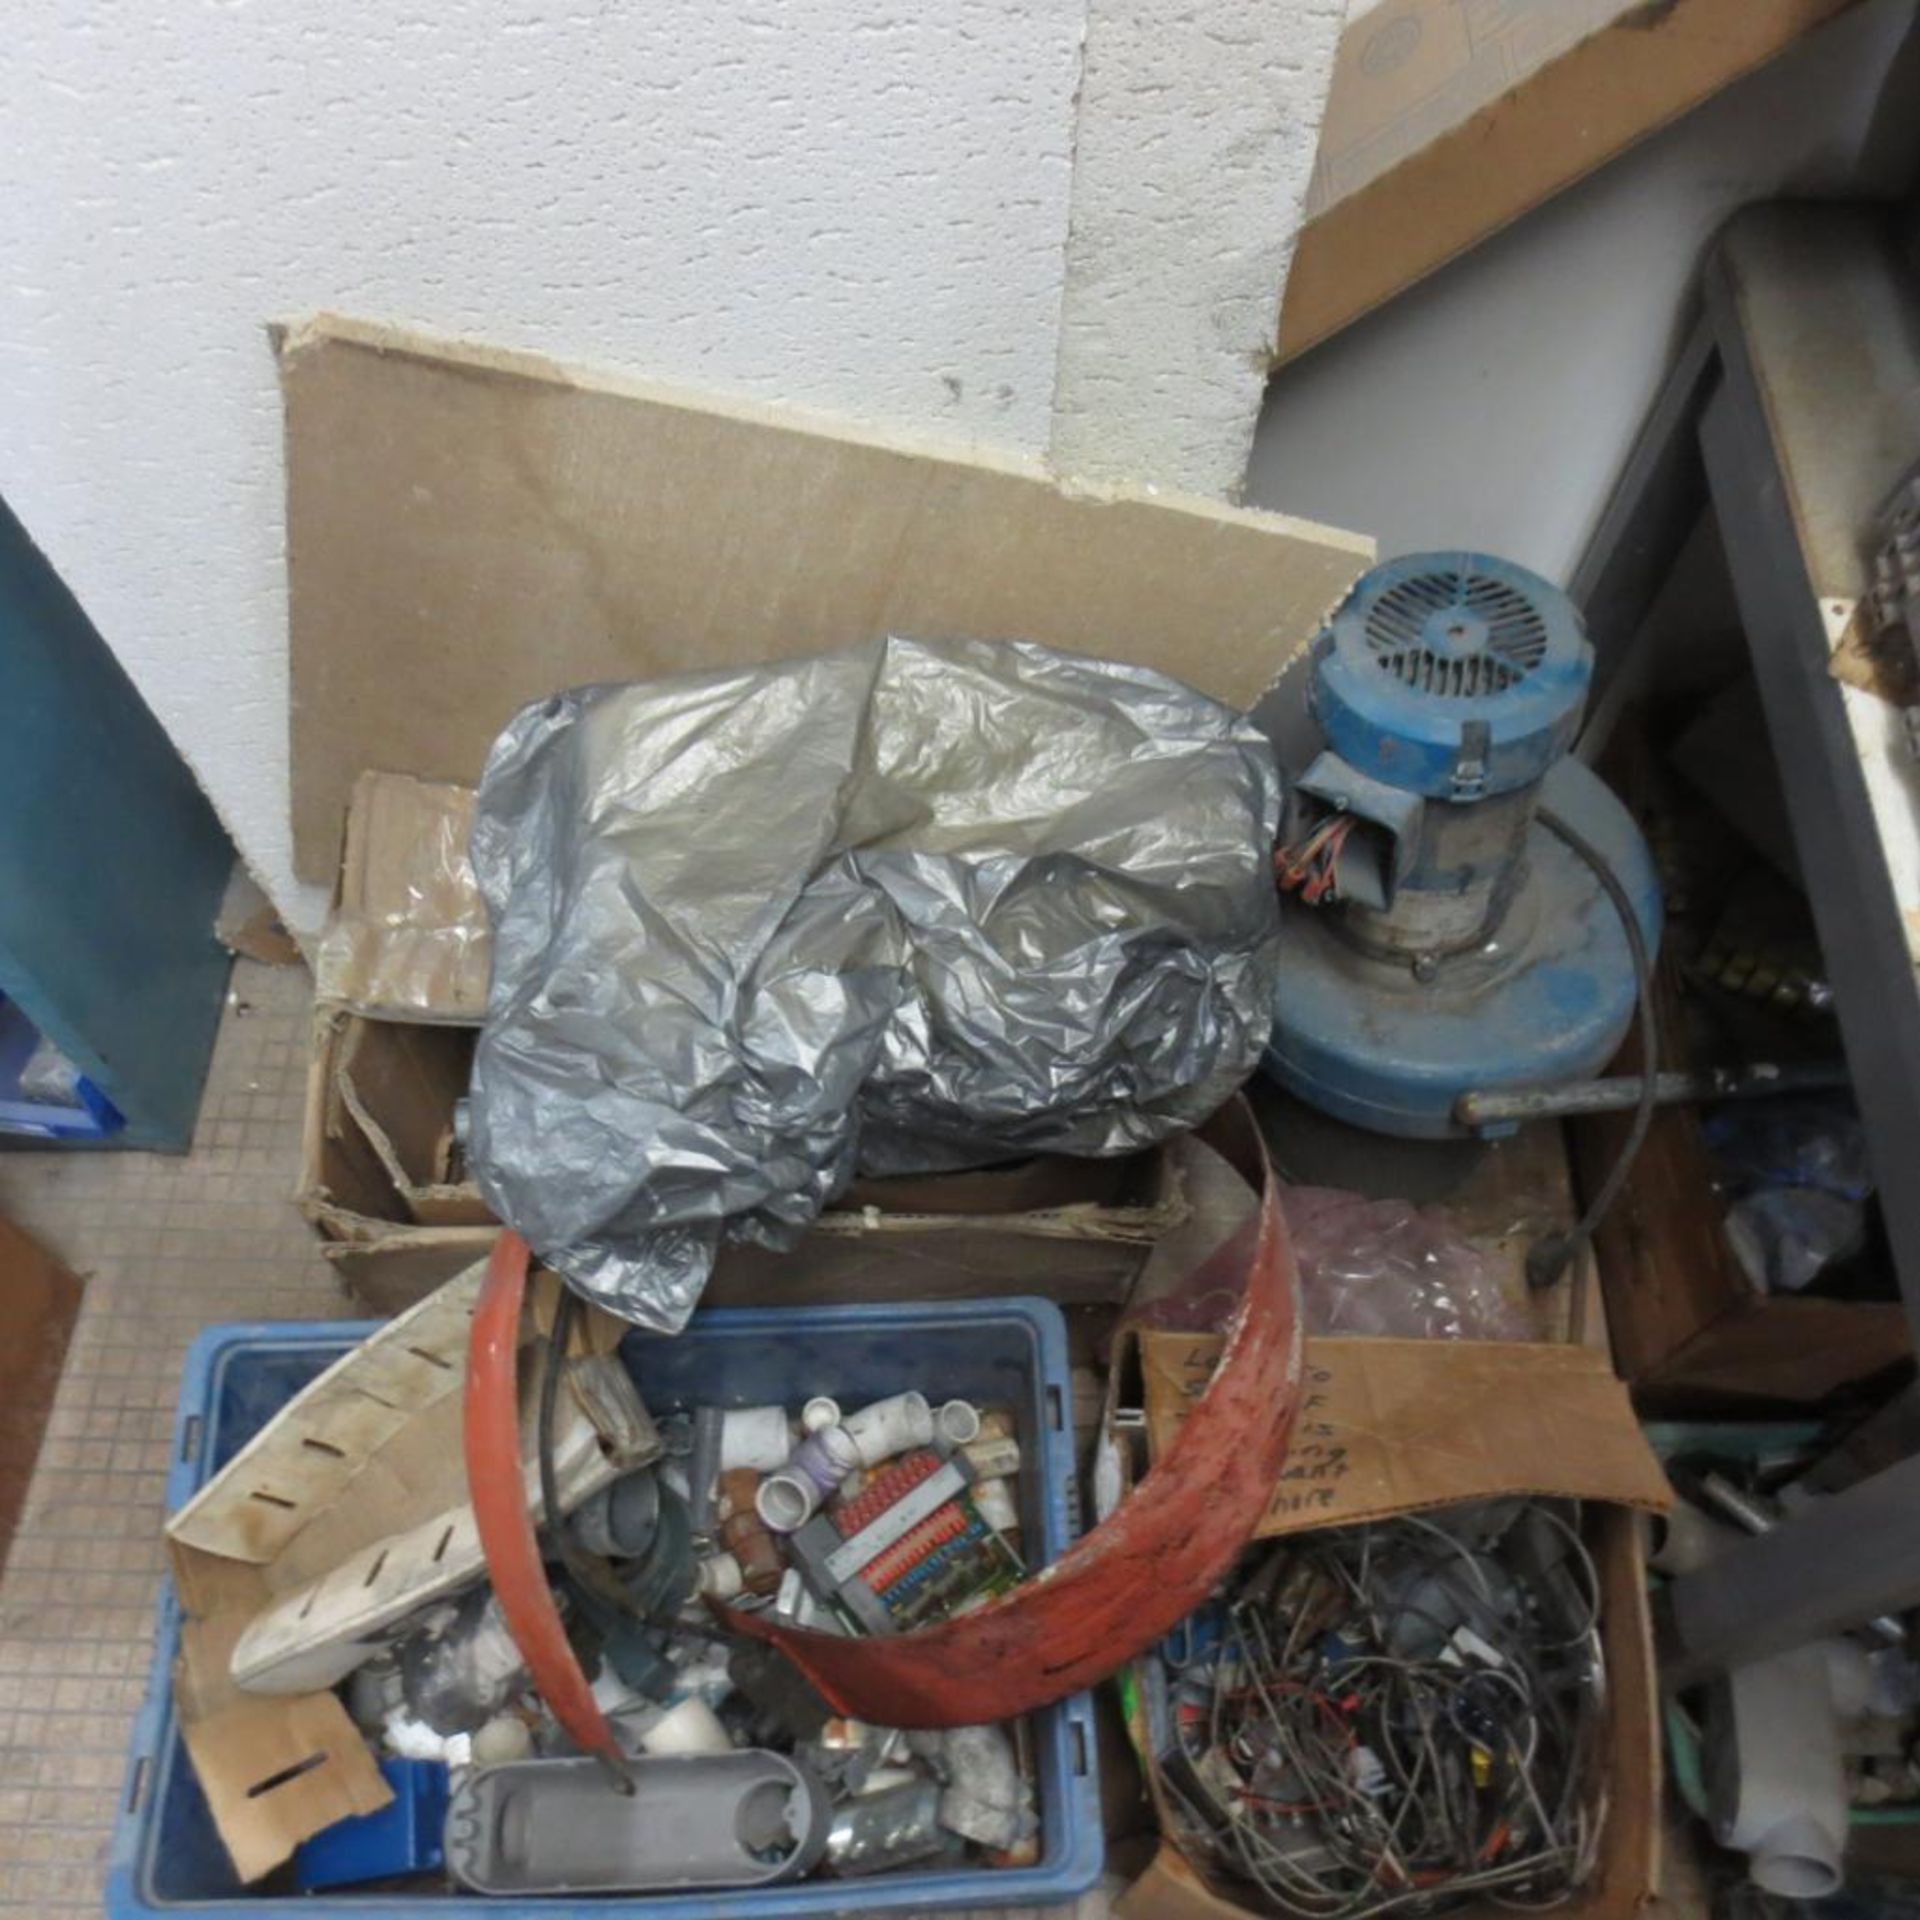 Parts Room Consisting of Gears, Electric Boards, Motors, AB Item, Filters, Motor Starters and Parts - Image 39 of 42